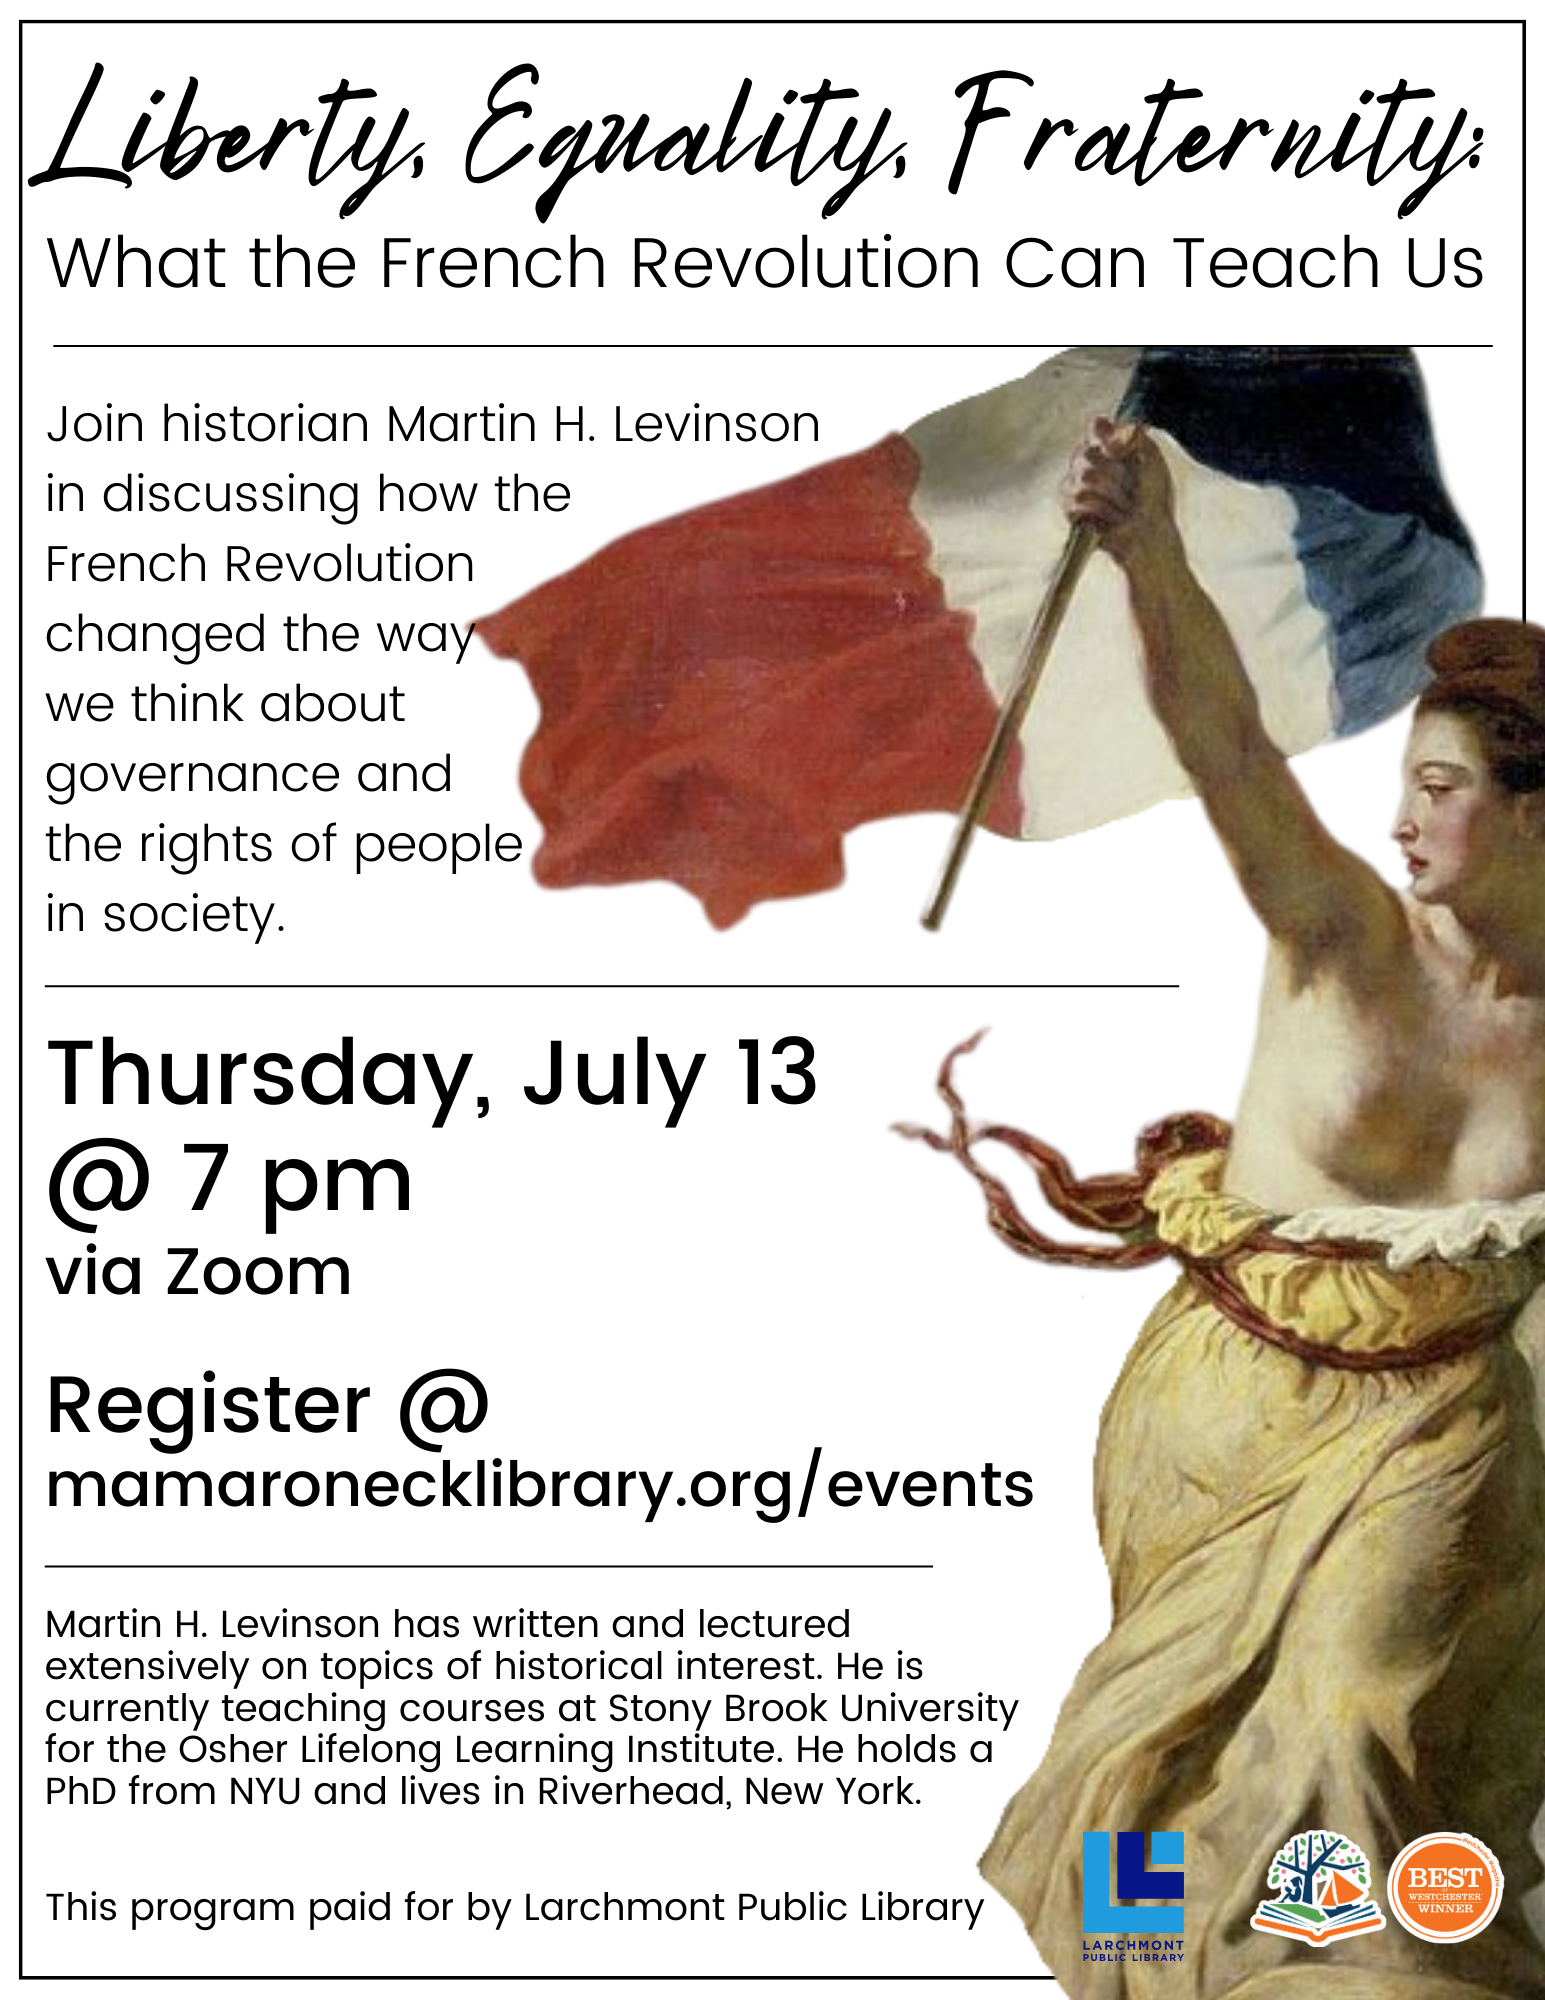 via Zoom: 7/13 @ 7pm - Libery, Equality, Fraternity - what the French revolution can teach us